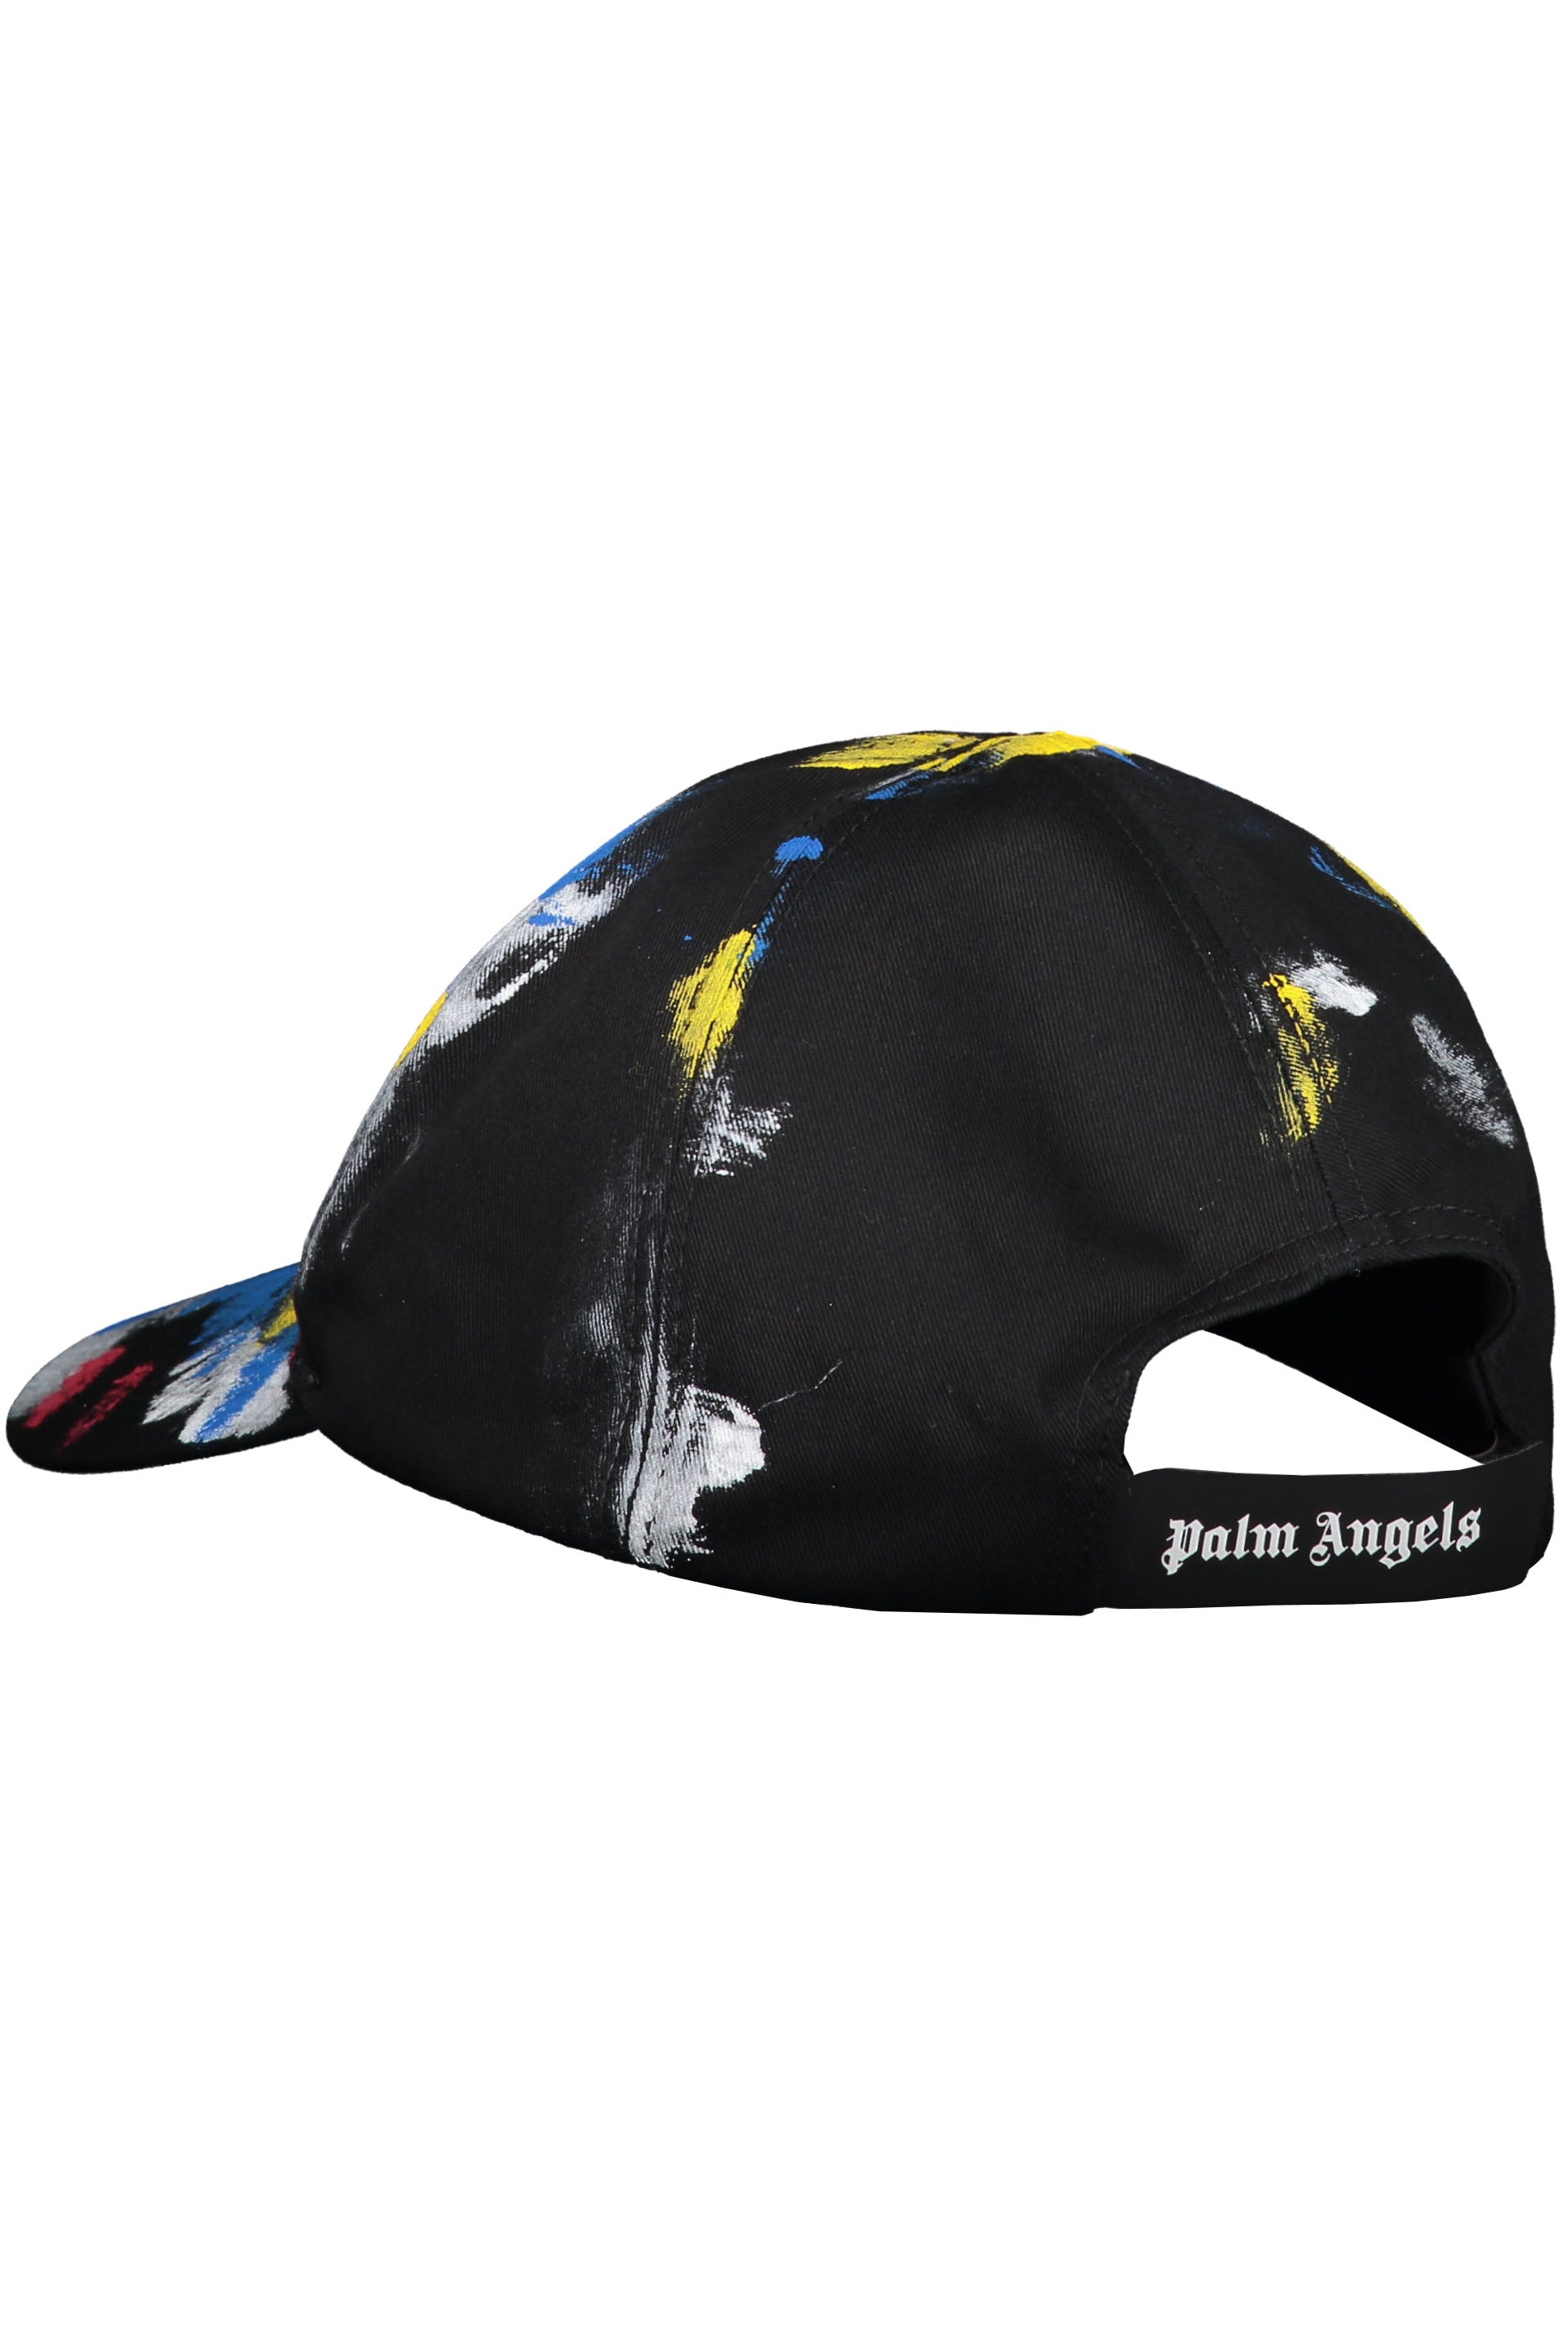 Palm-Angels-OUTLET-SALE-Baseball-cap-Hute-TU-ARCHIVE-COLLECTION-2.jpg